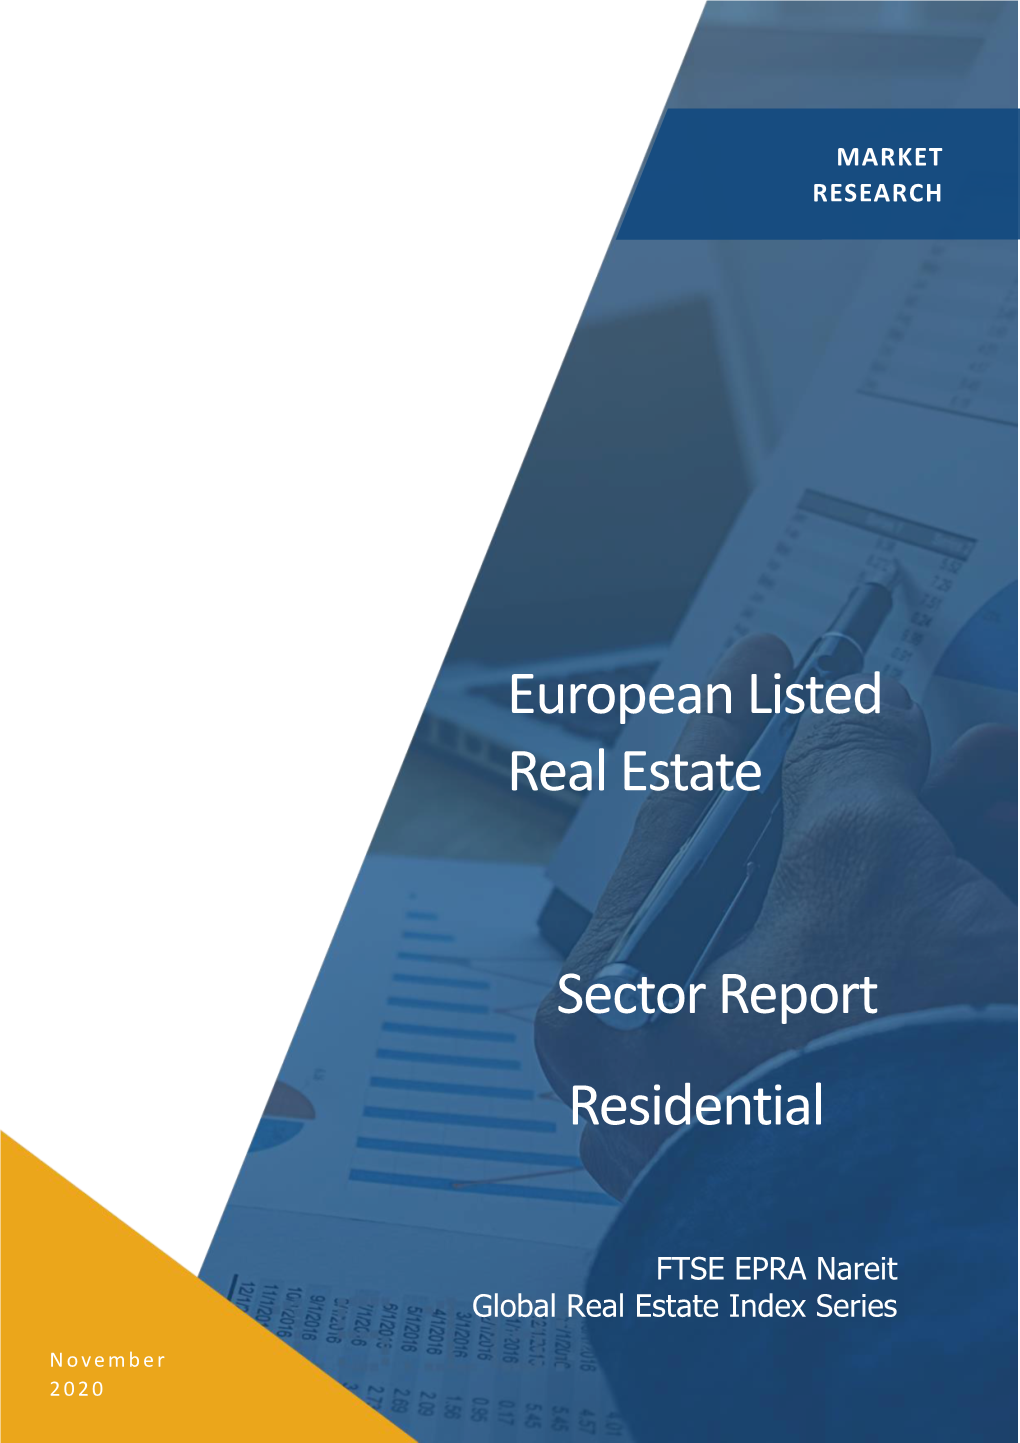 European Listed Real Estate Sector Report Residential